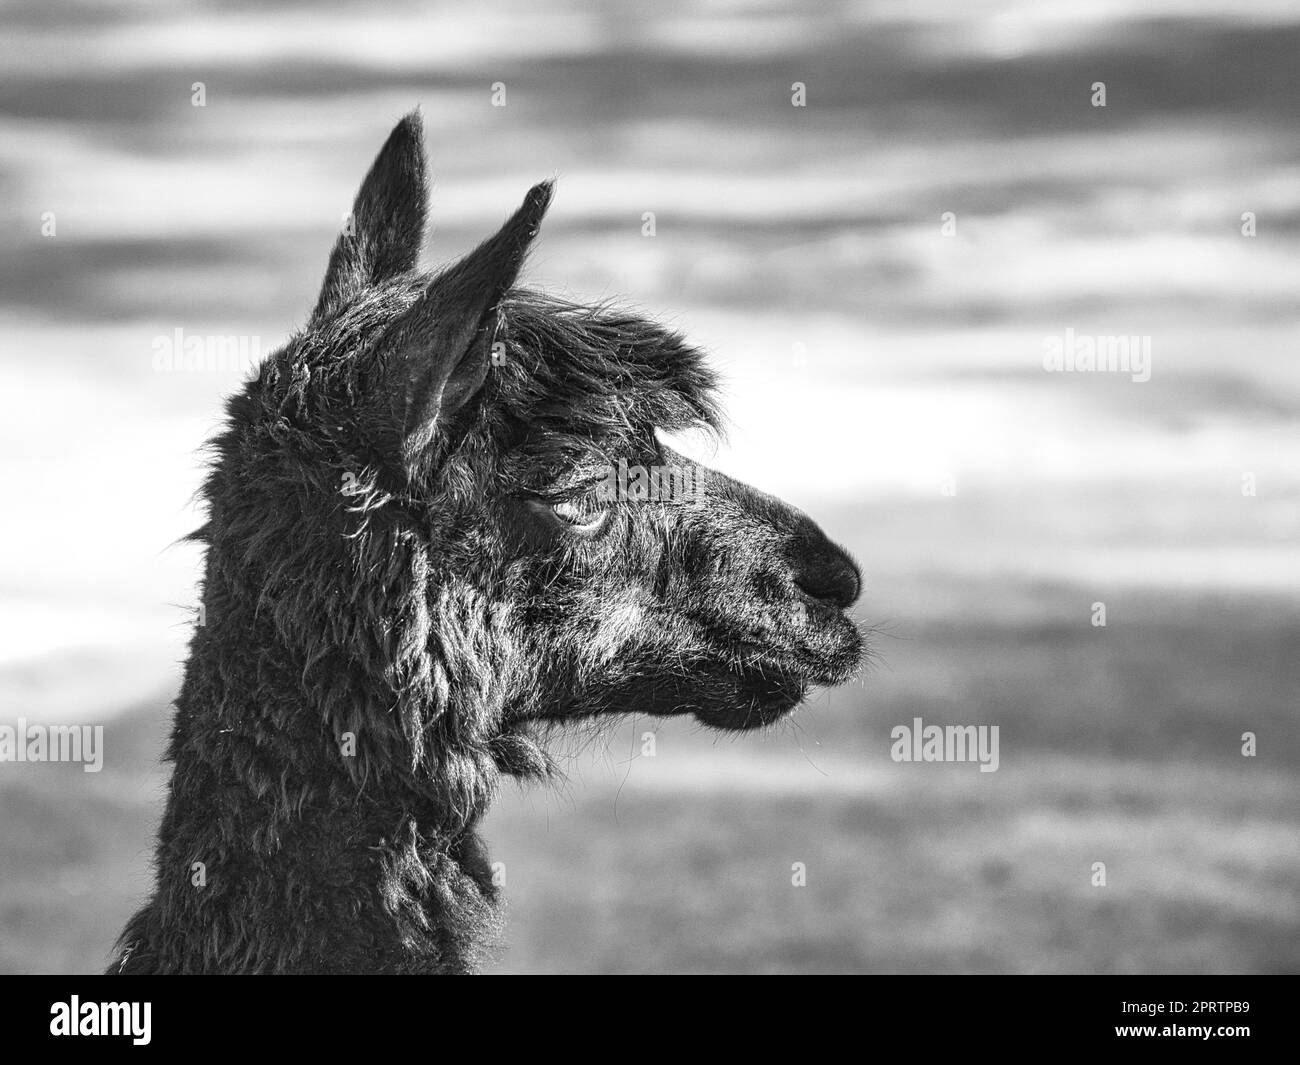 alpaca in portrait taken in black and white. Interested and cute mammals. Stock Photo